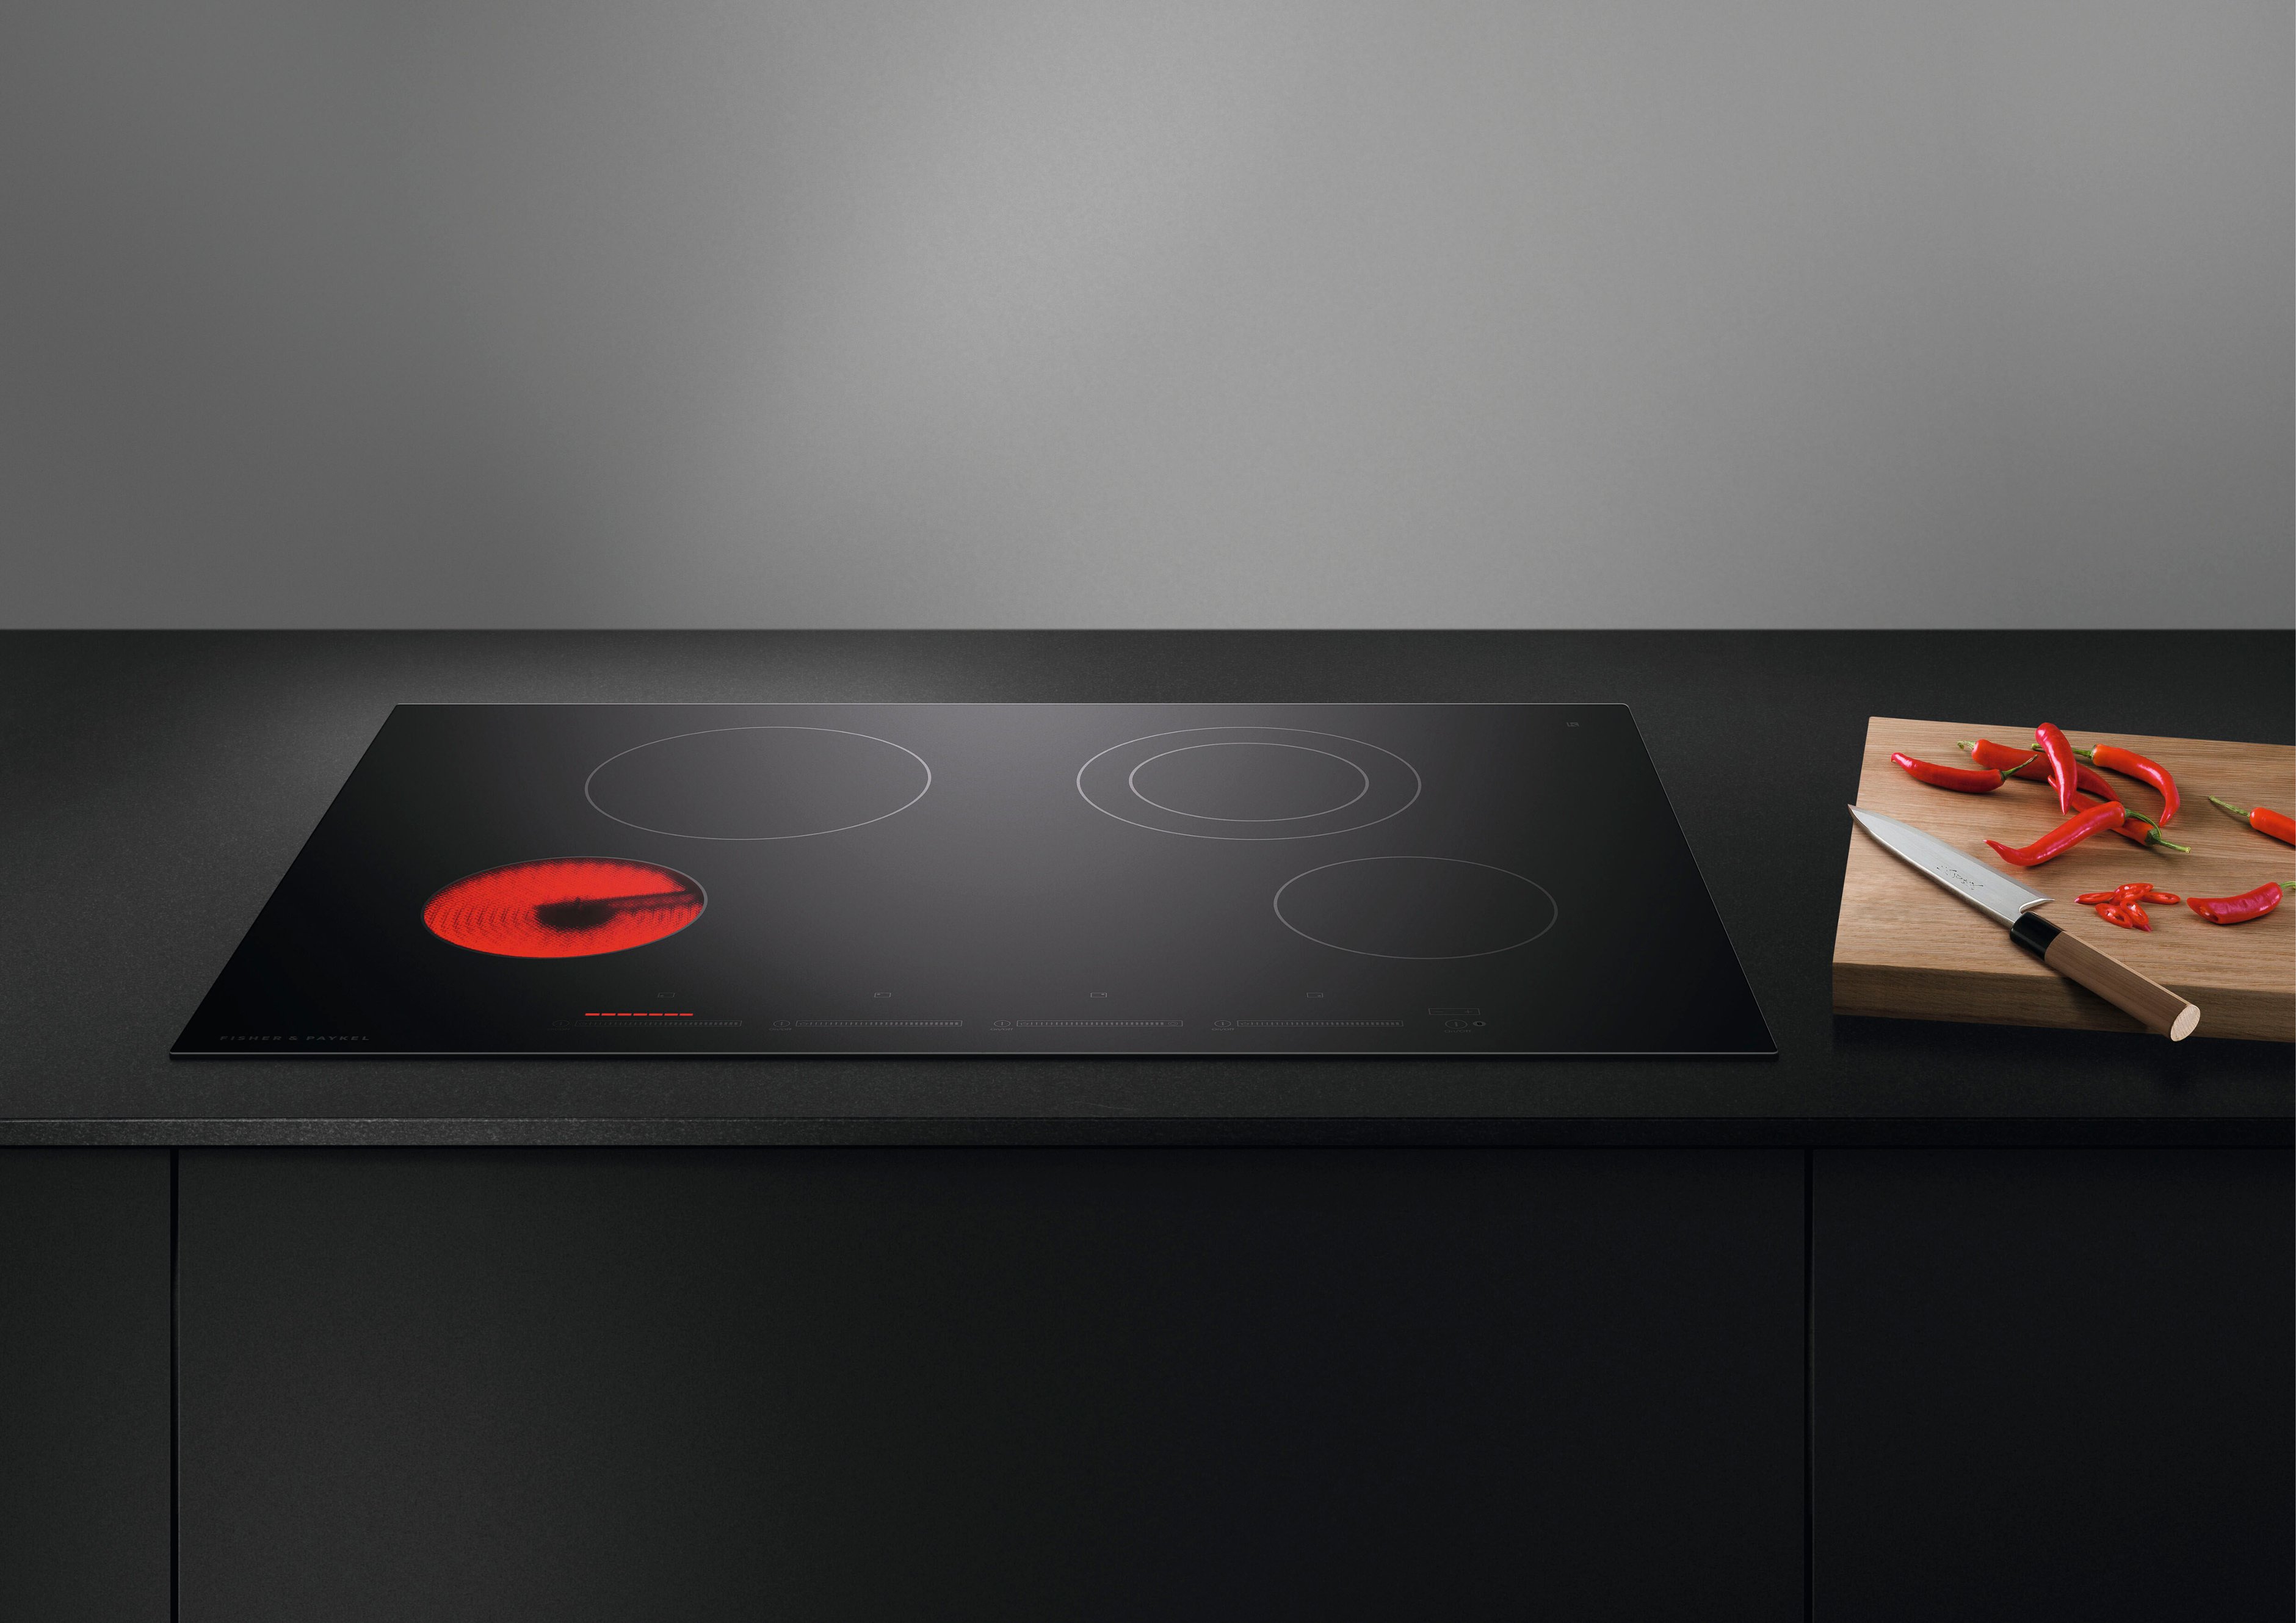 LG 30 Built-In Electric Cooktop with 5 Elements and Warming Zone